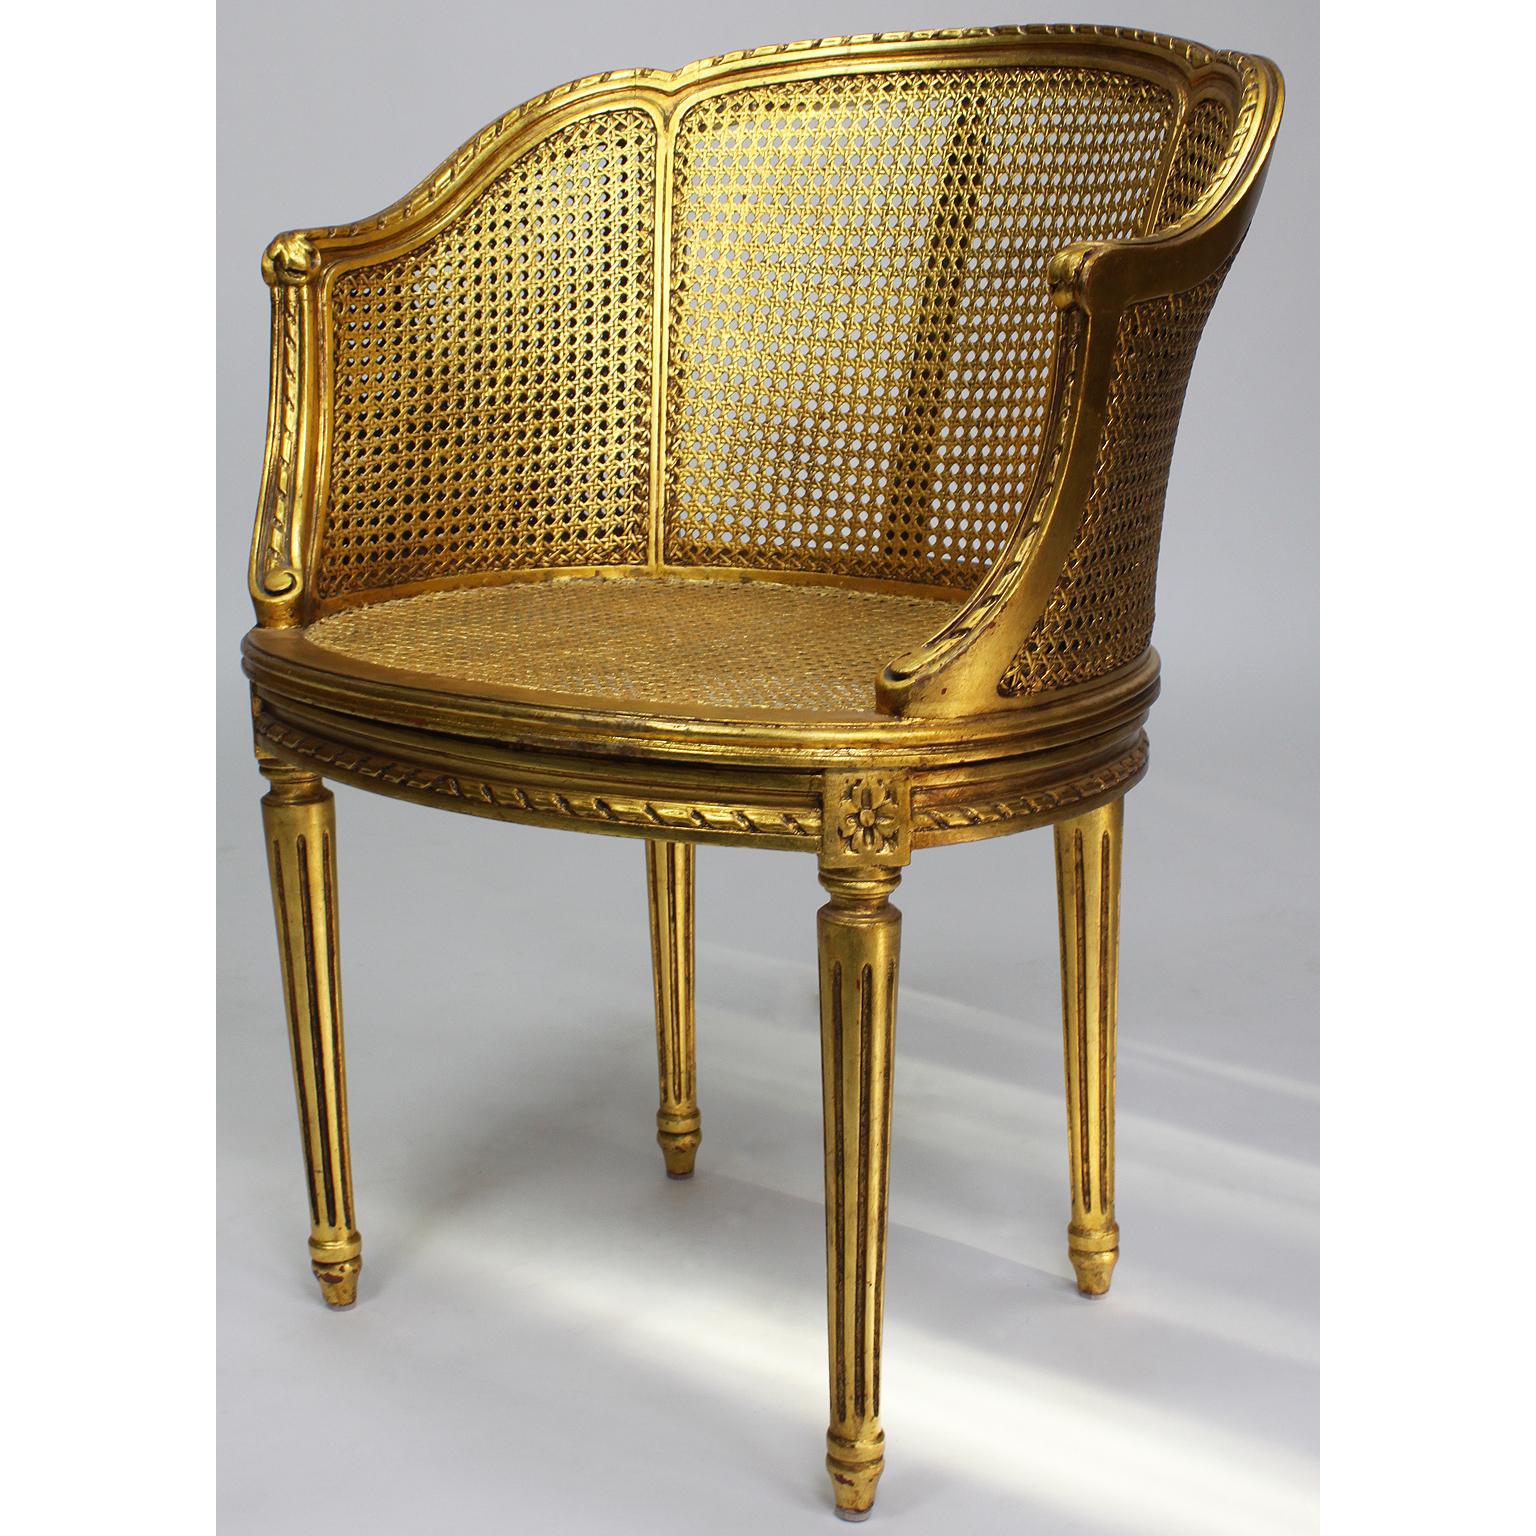 Pair of French Louis XVI style giltwood carved and cane Fauteuils armchairs. The arched back and barrel-shaped frames with a caned back, sides and seat all raised on four fluted legs, circa 1930s.

Measures: Height 31 7/8 inches (81 cm)
Width 24